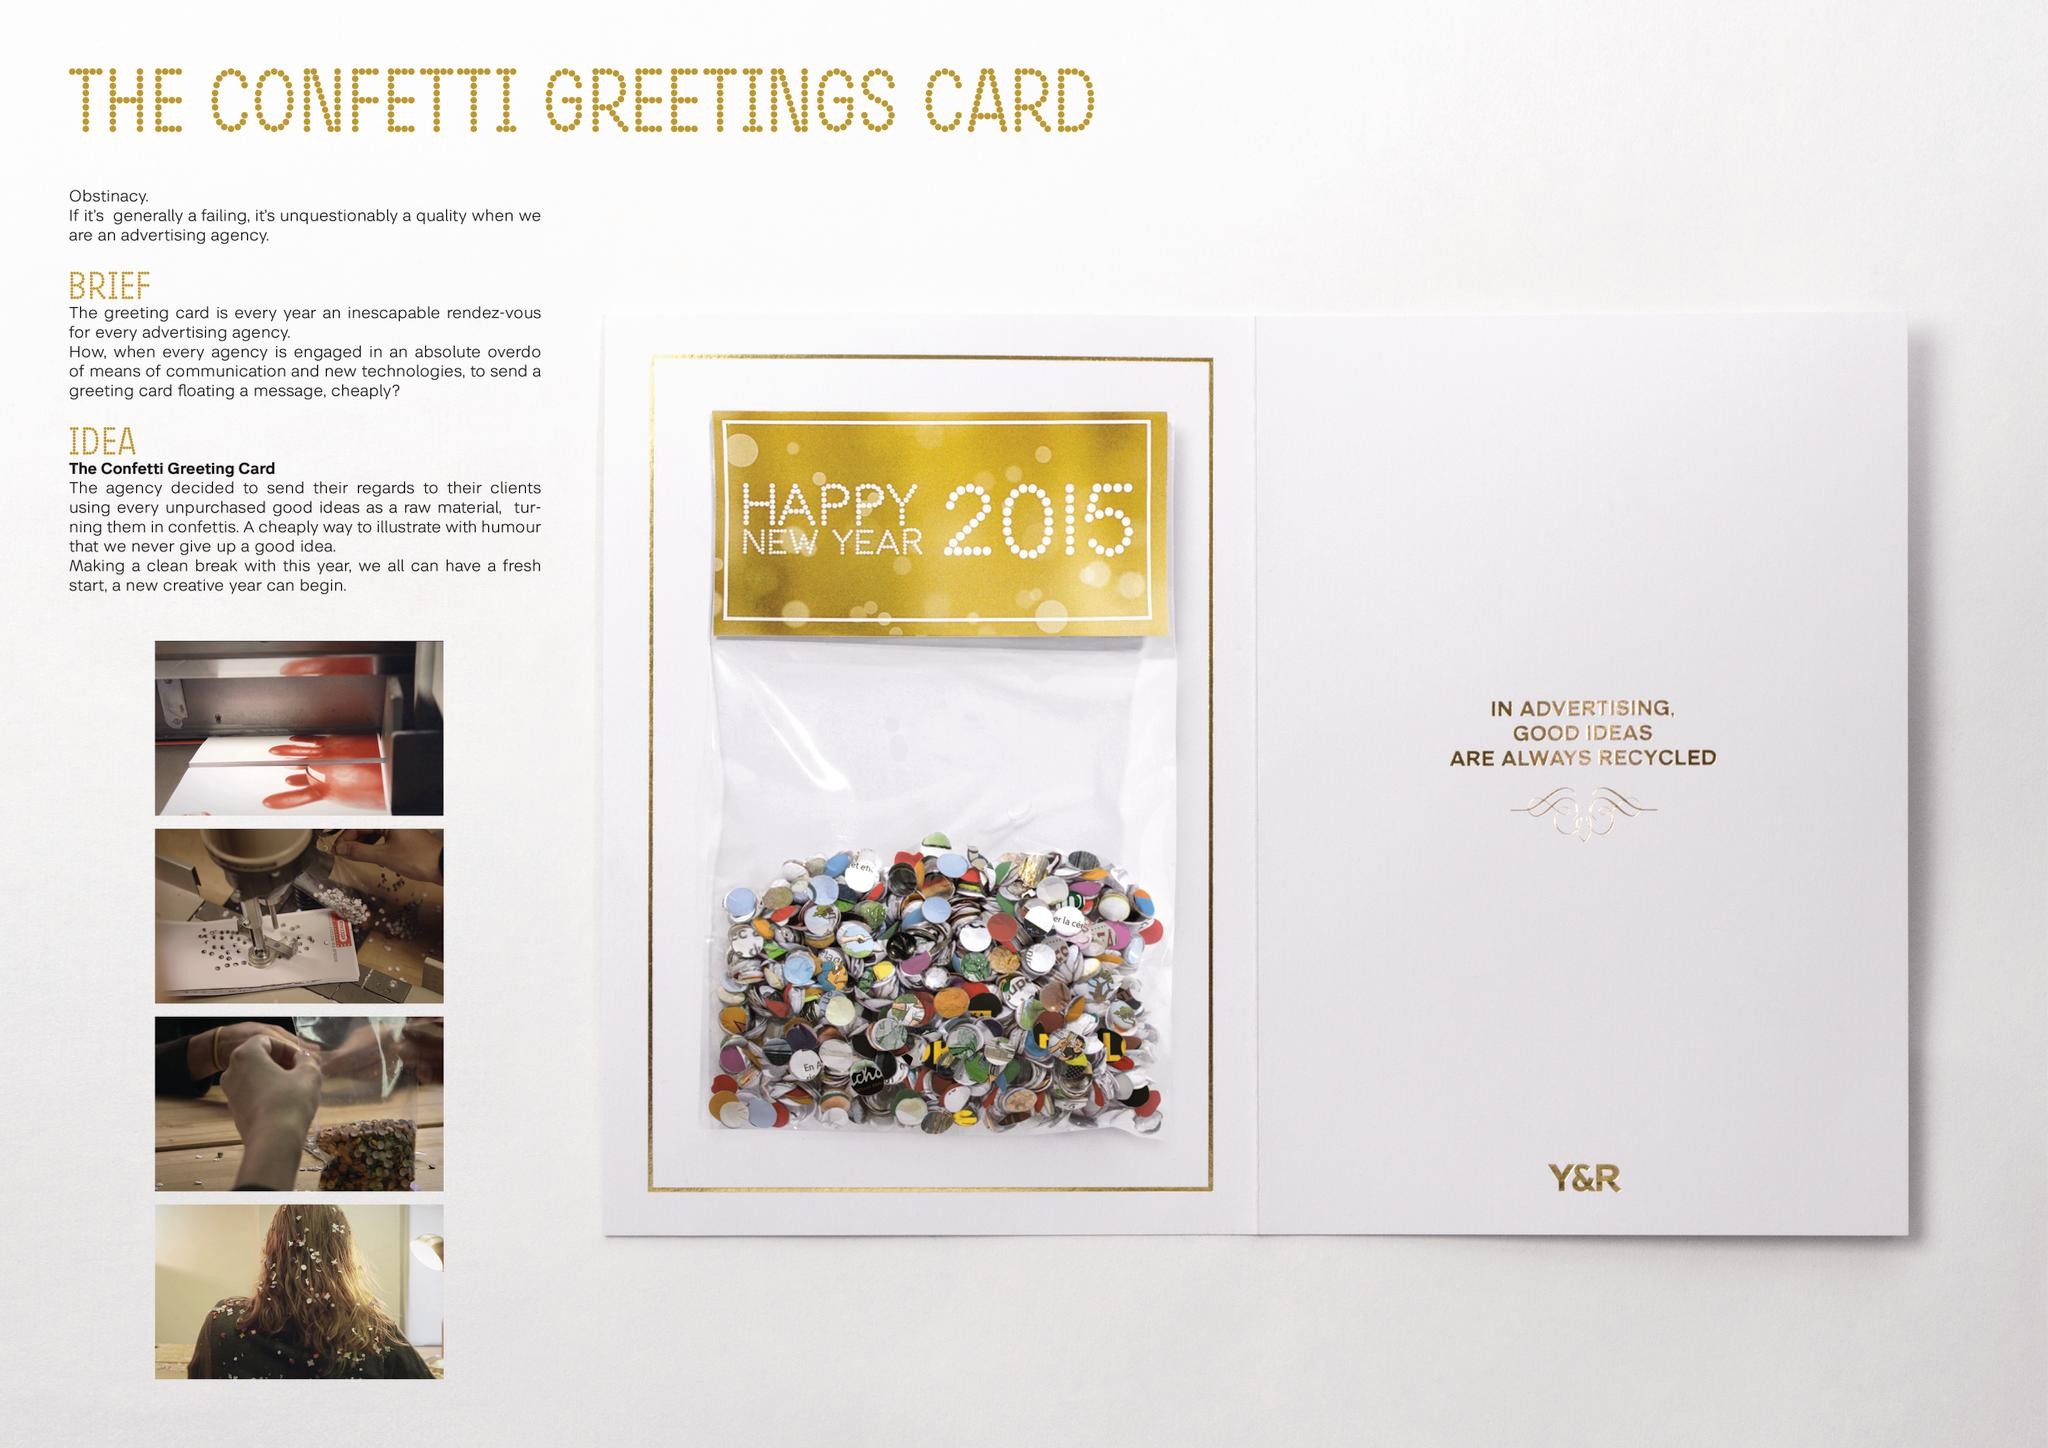 THE CONFETTI GREATINGS CARD